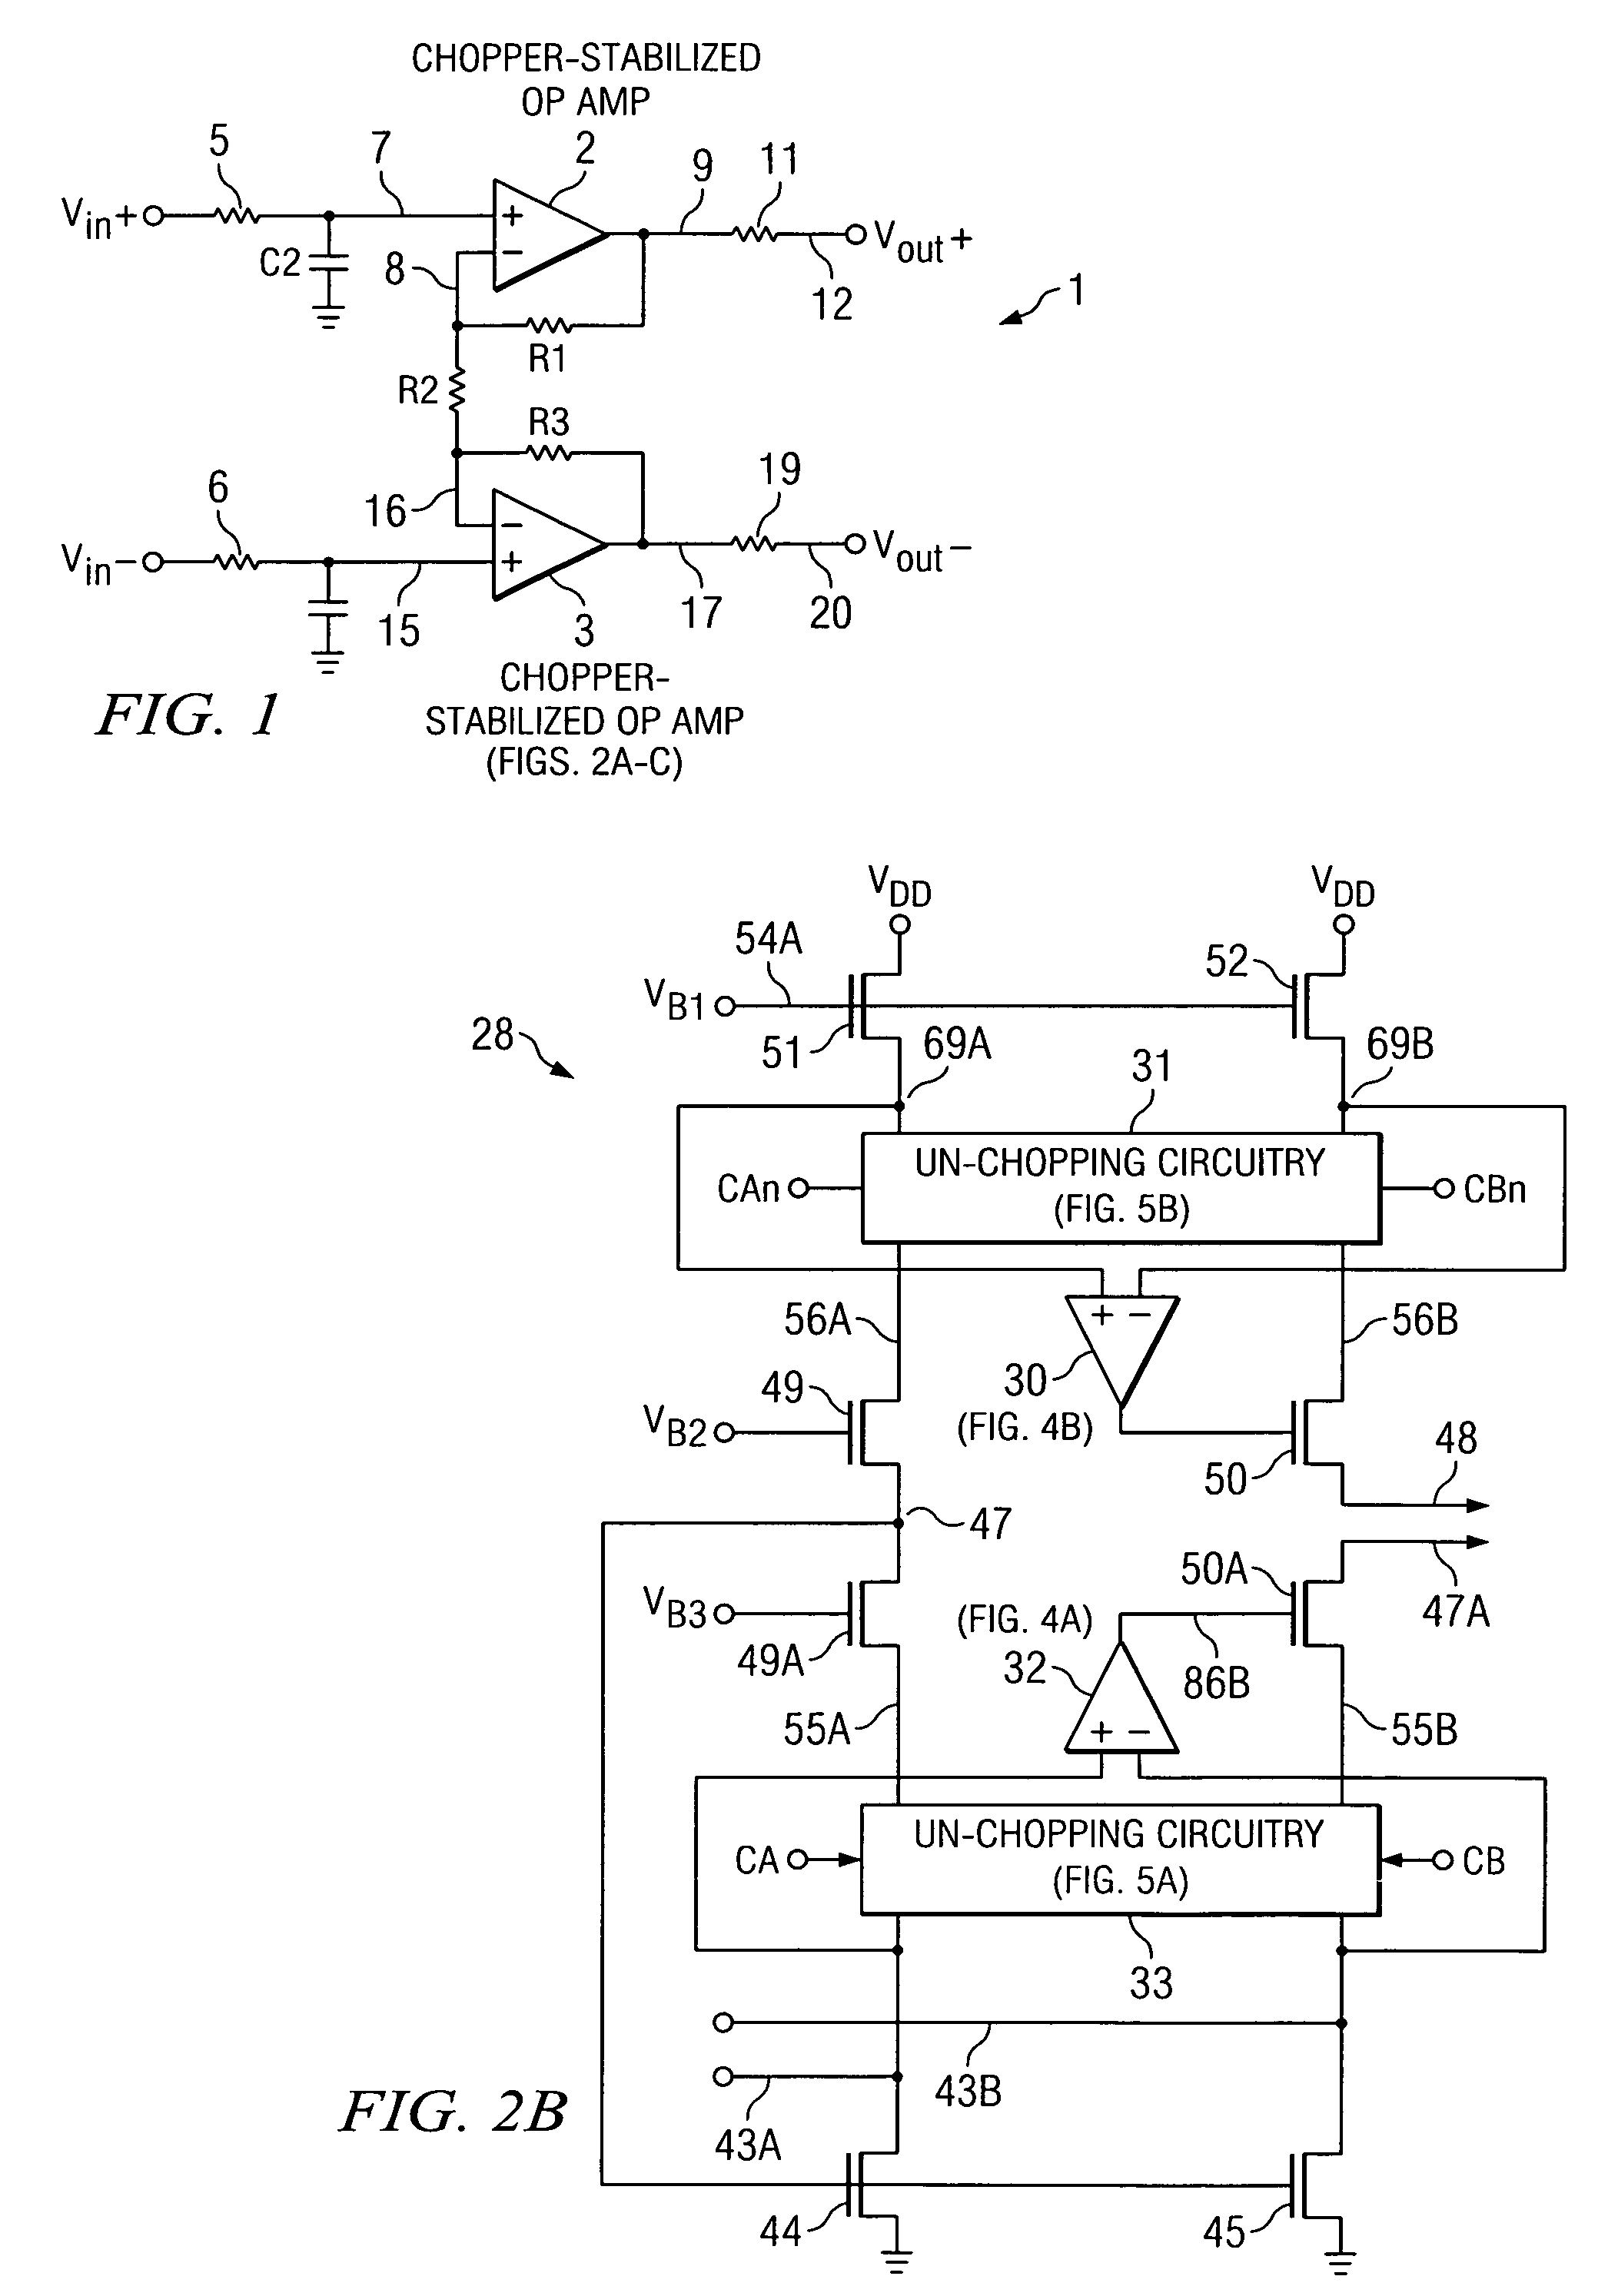 Chopper-stabilized operational amplifier and method